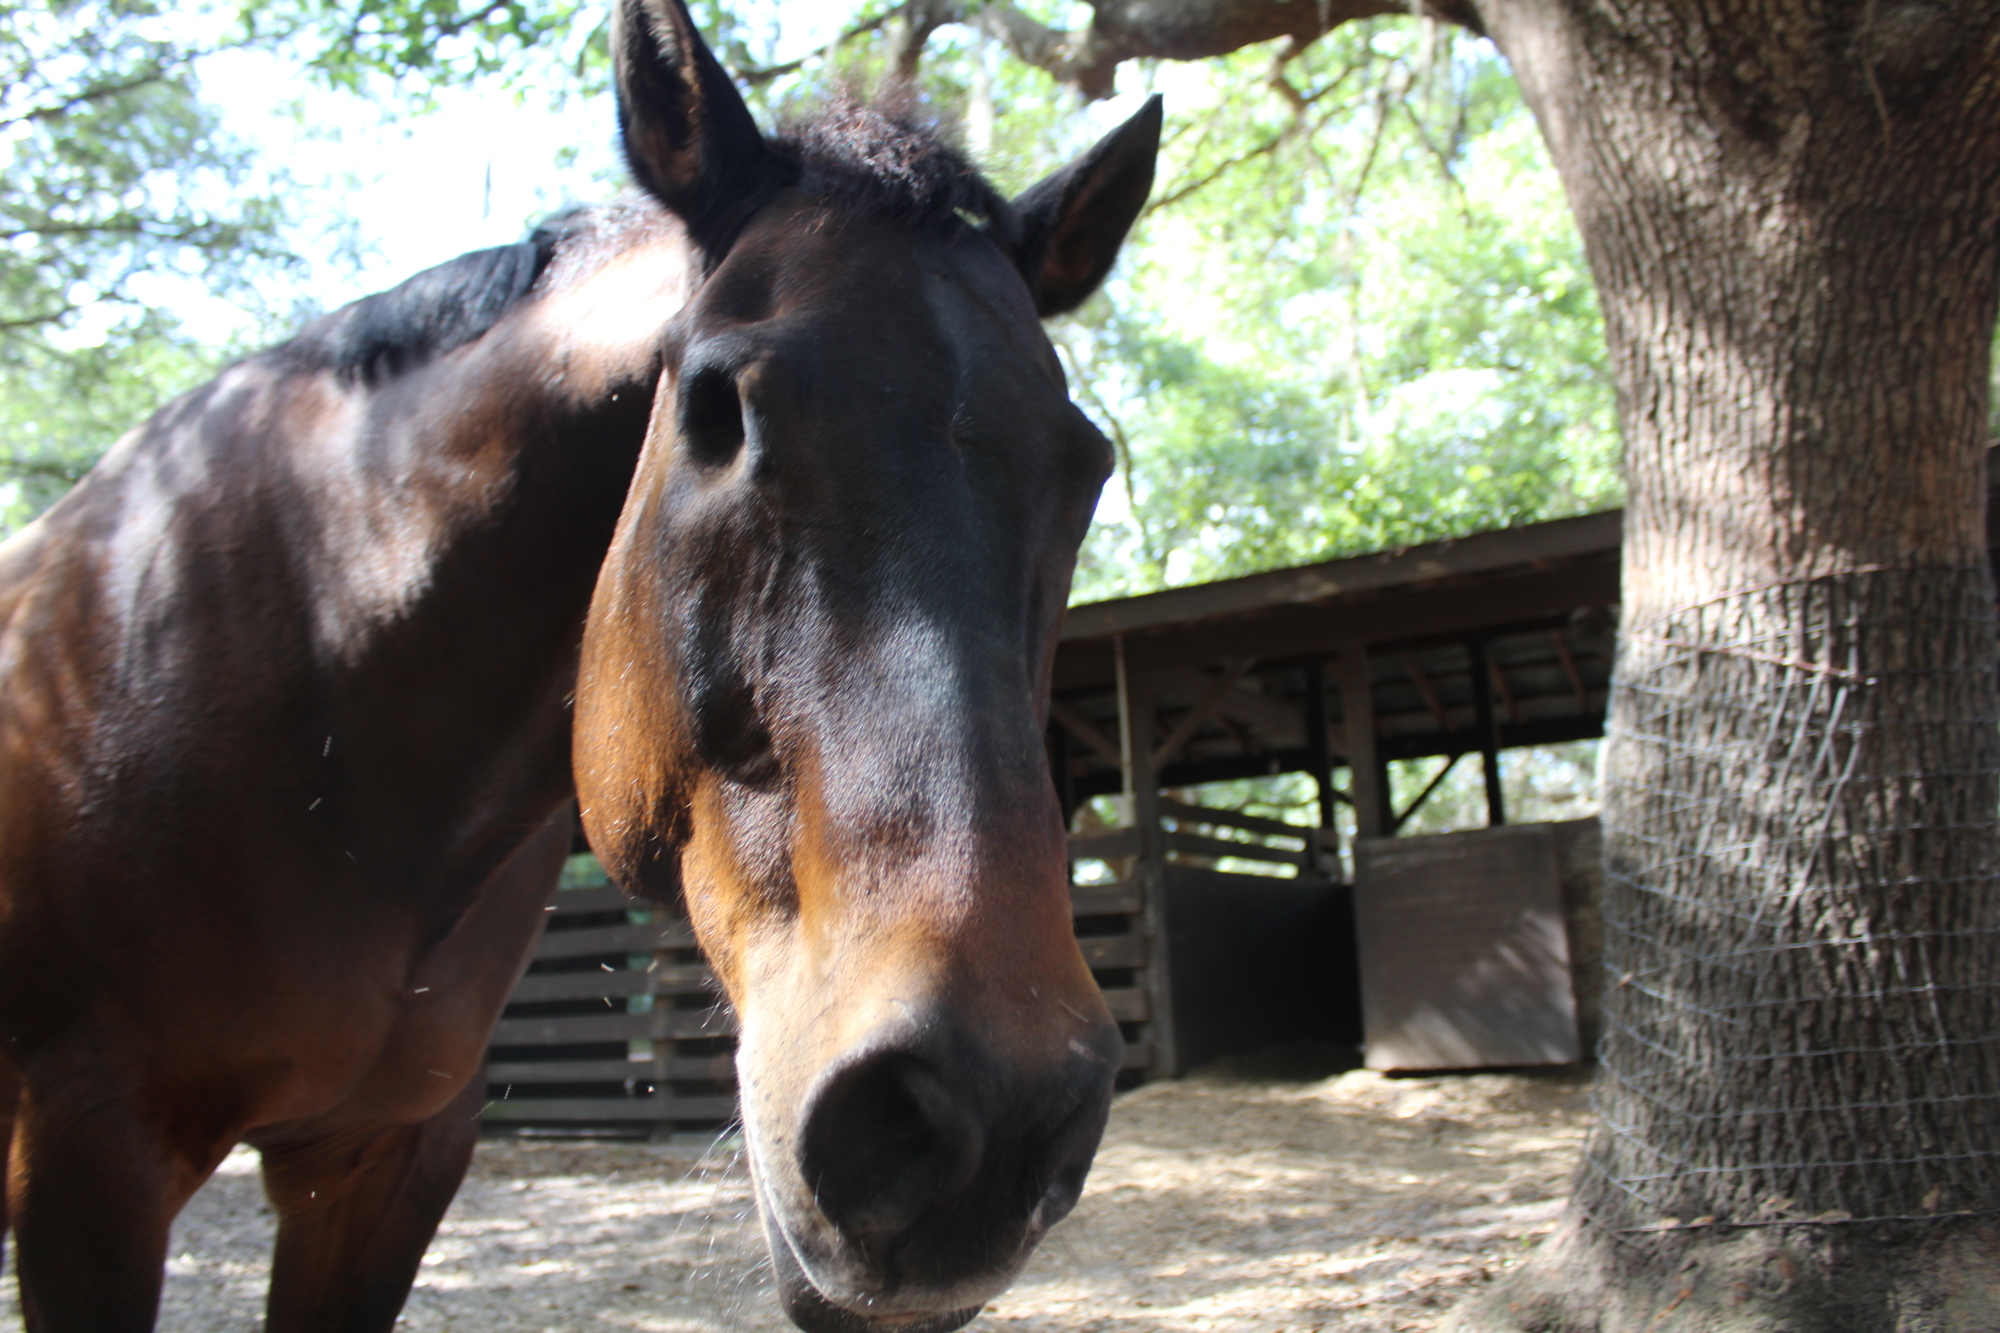 Magic was a beloved horse at SMART and the inspiration for one of the nonprofit's programs. (File photo)